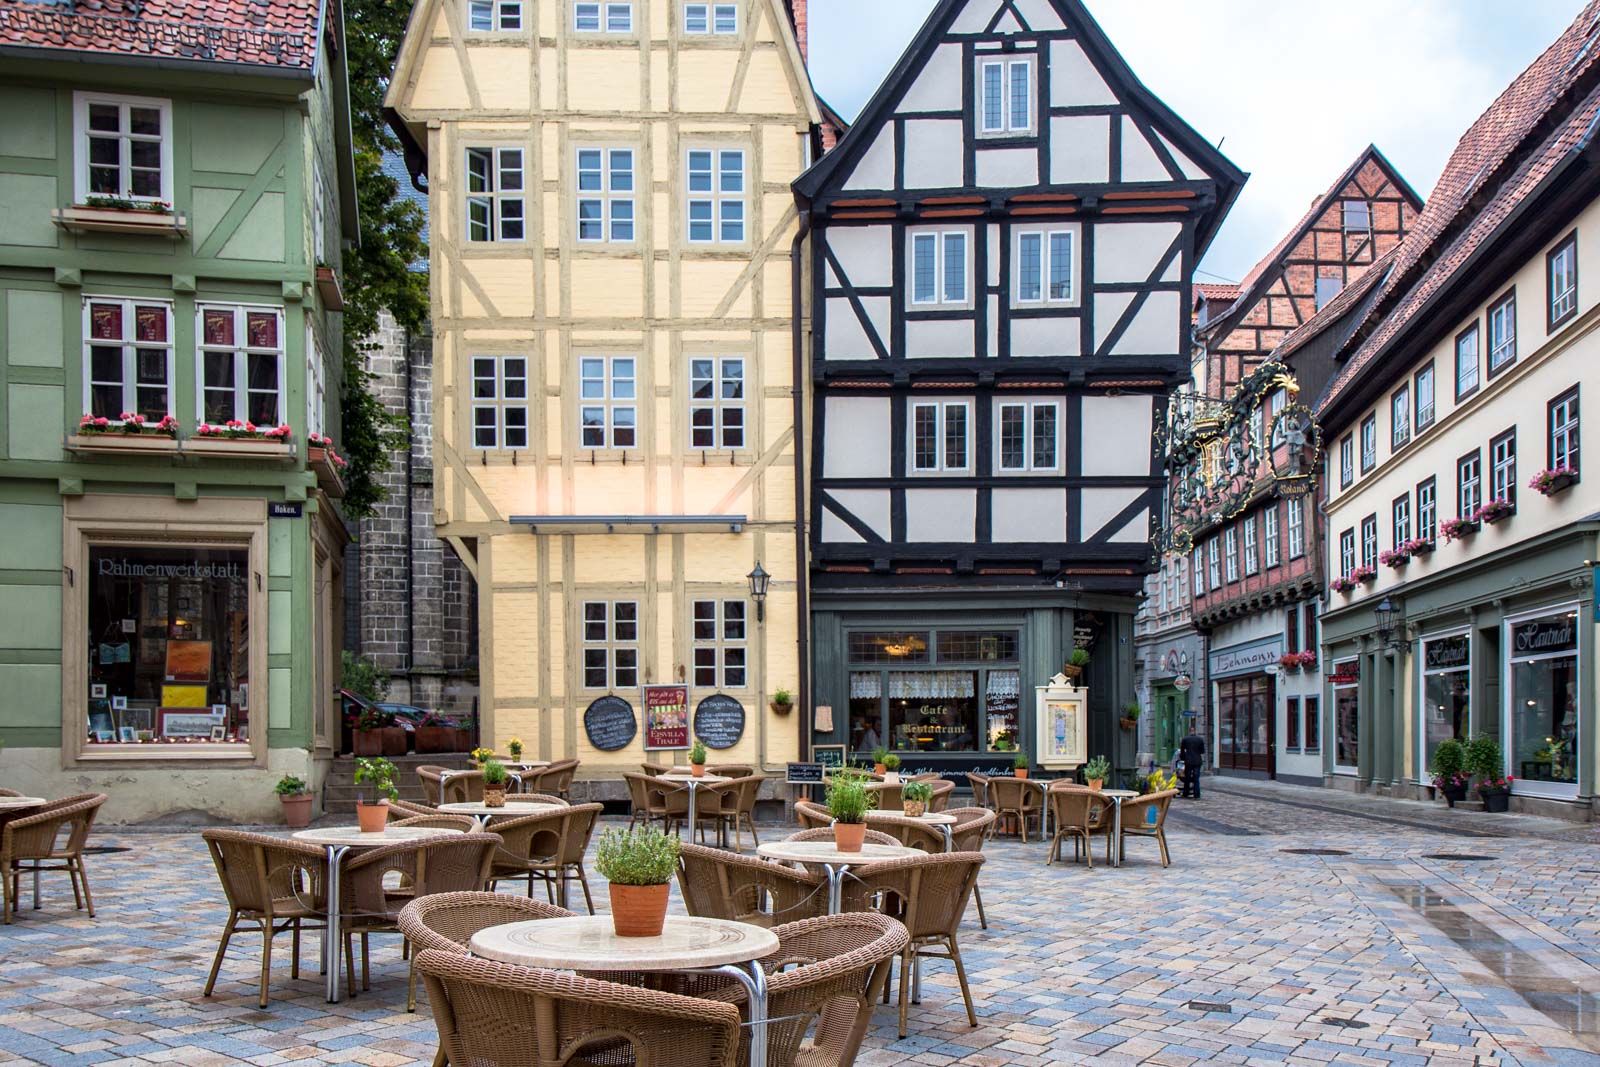 The old medieval town of Quedlinburg, Germany